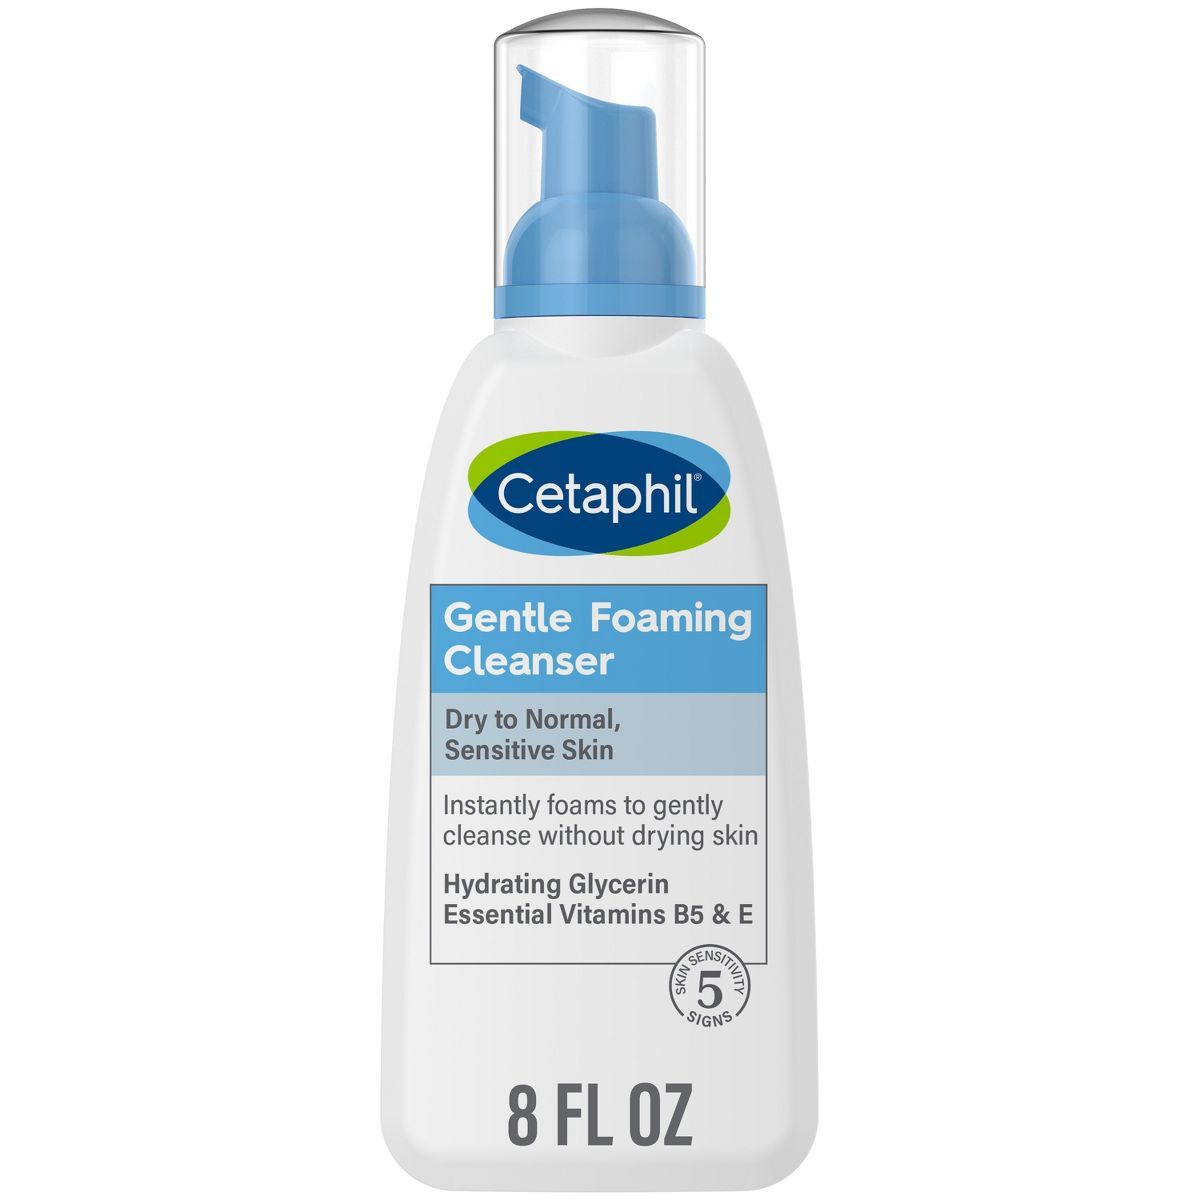 Cetaphil Oil Free Gentle Foaming Facial Cleanser with Glycerin - 8 fl oz | Target